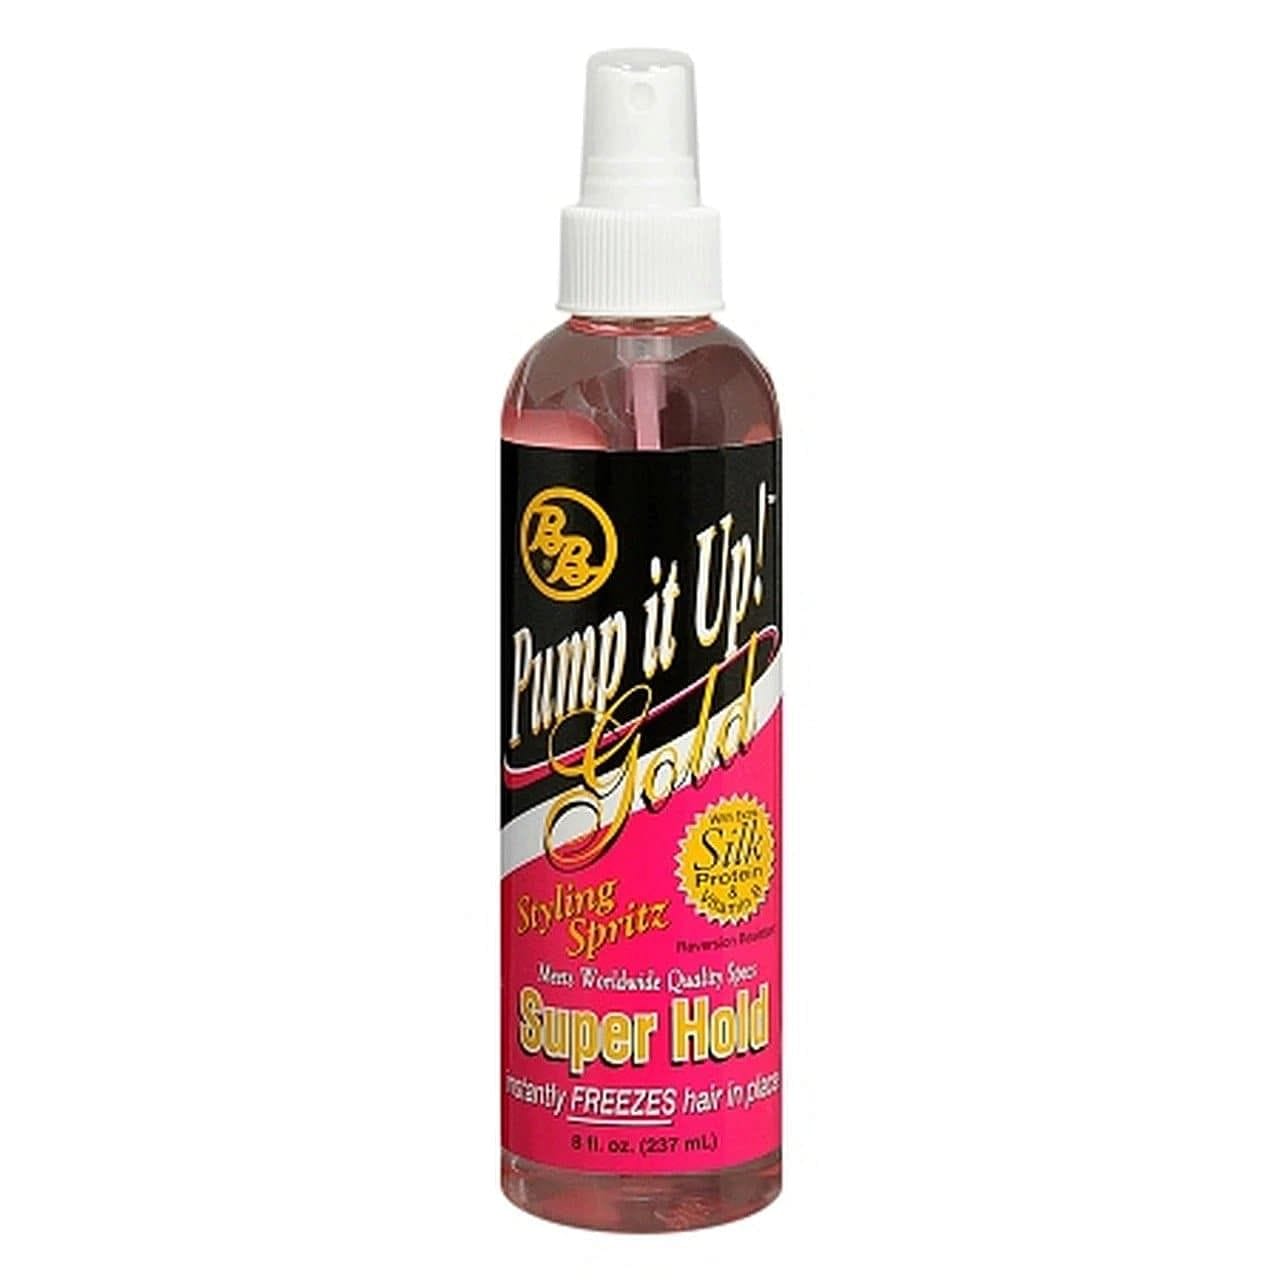 BB Pump It Up! Gold Styling Spritz - Super Hold 8 oz. - Goldy TV